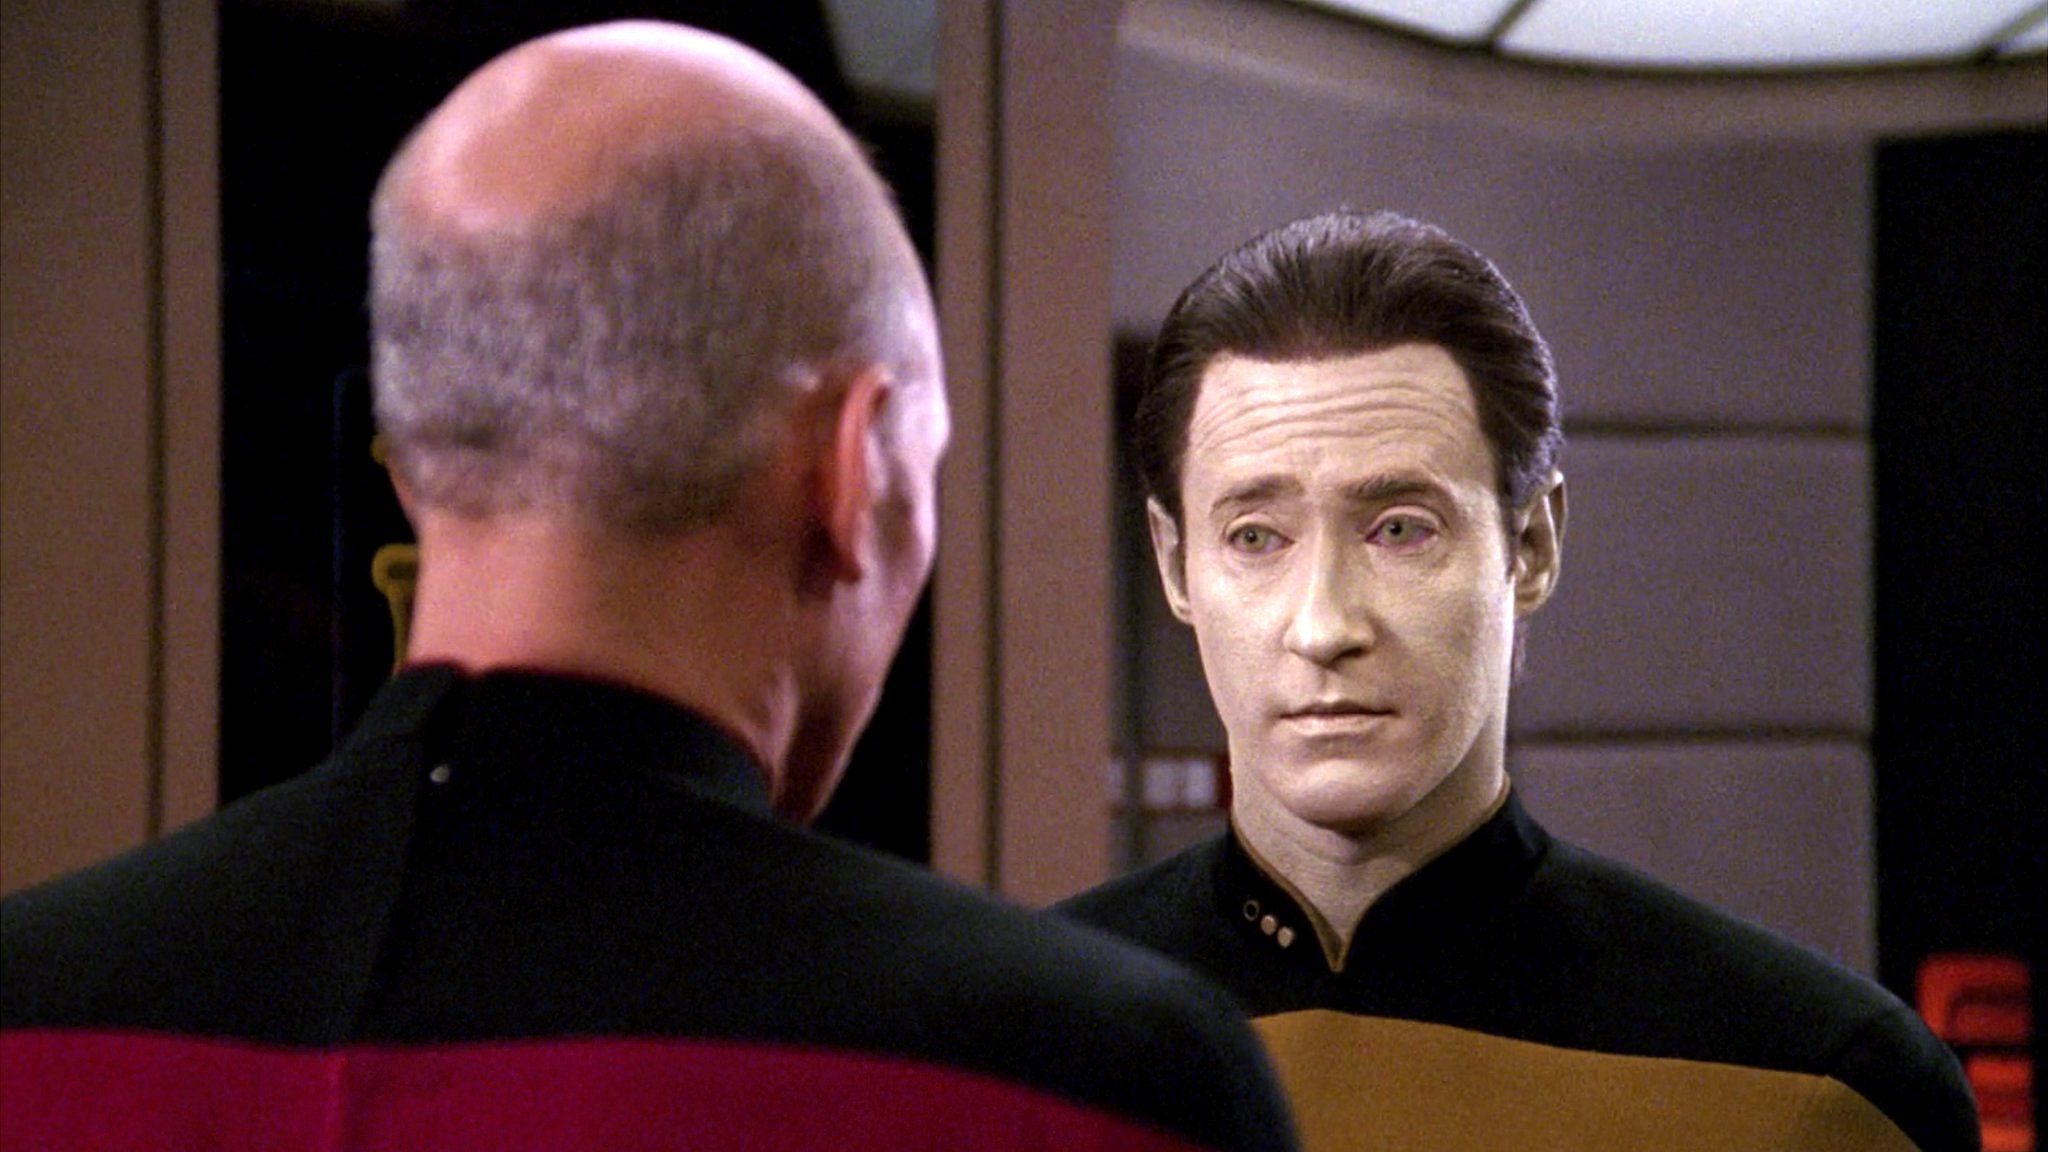 A picture of Star Trek's Capt Jean-Luc Picard speaking with android character Data